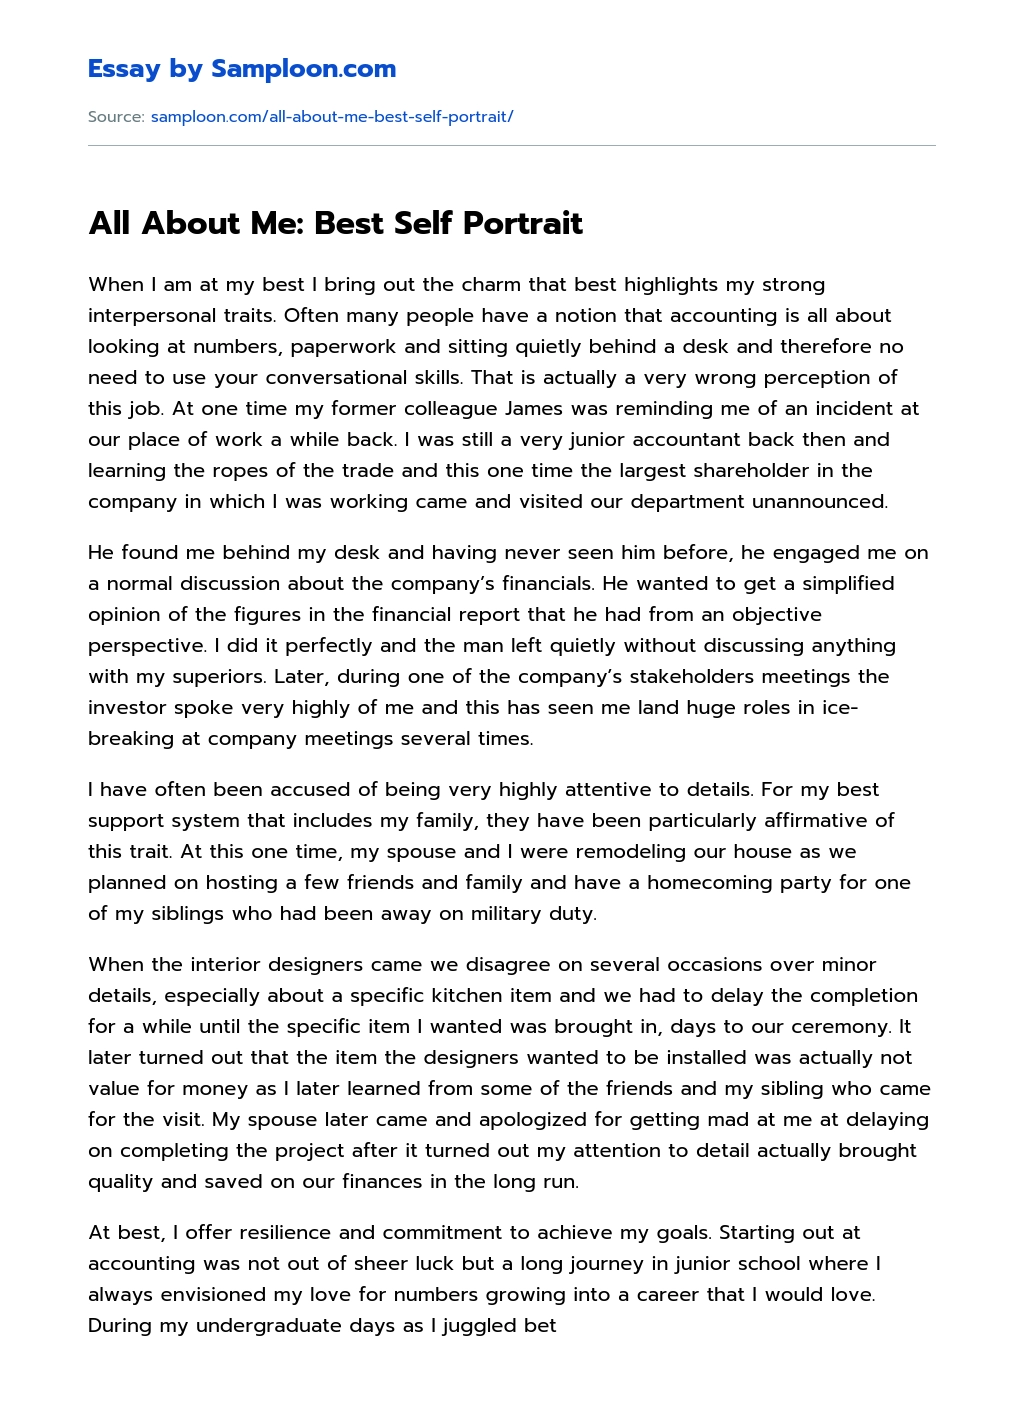 All About Me: Best Self Portrait  essay